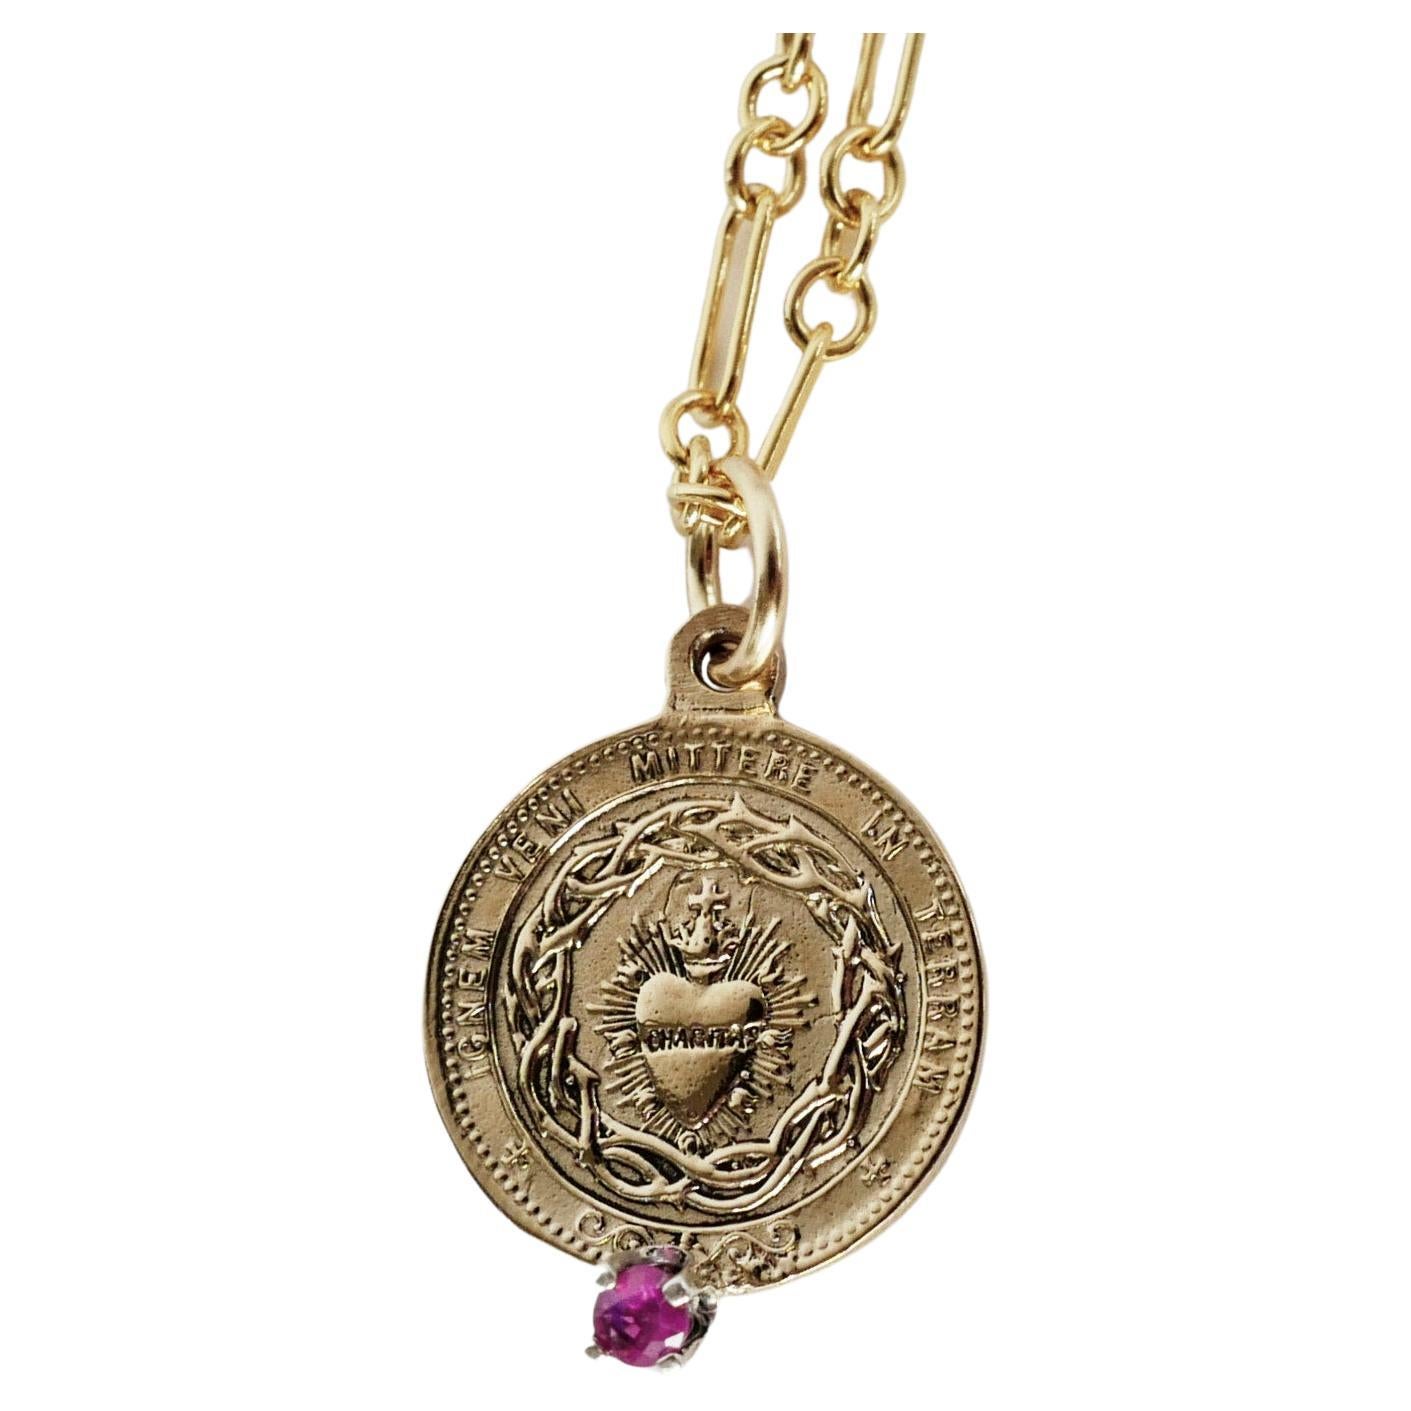 Red Tourmaline Sacred Heart Coin Medal Pendant Gold Filled Chain Necklace

The Sacred Heart (also known as the Sacred Heart of Jesus) has one of the deepest meanings in the Roman Catholic practice. The symbol represents Jesus Christ’s actual heart